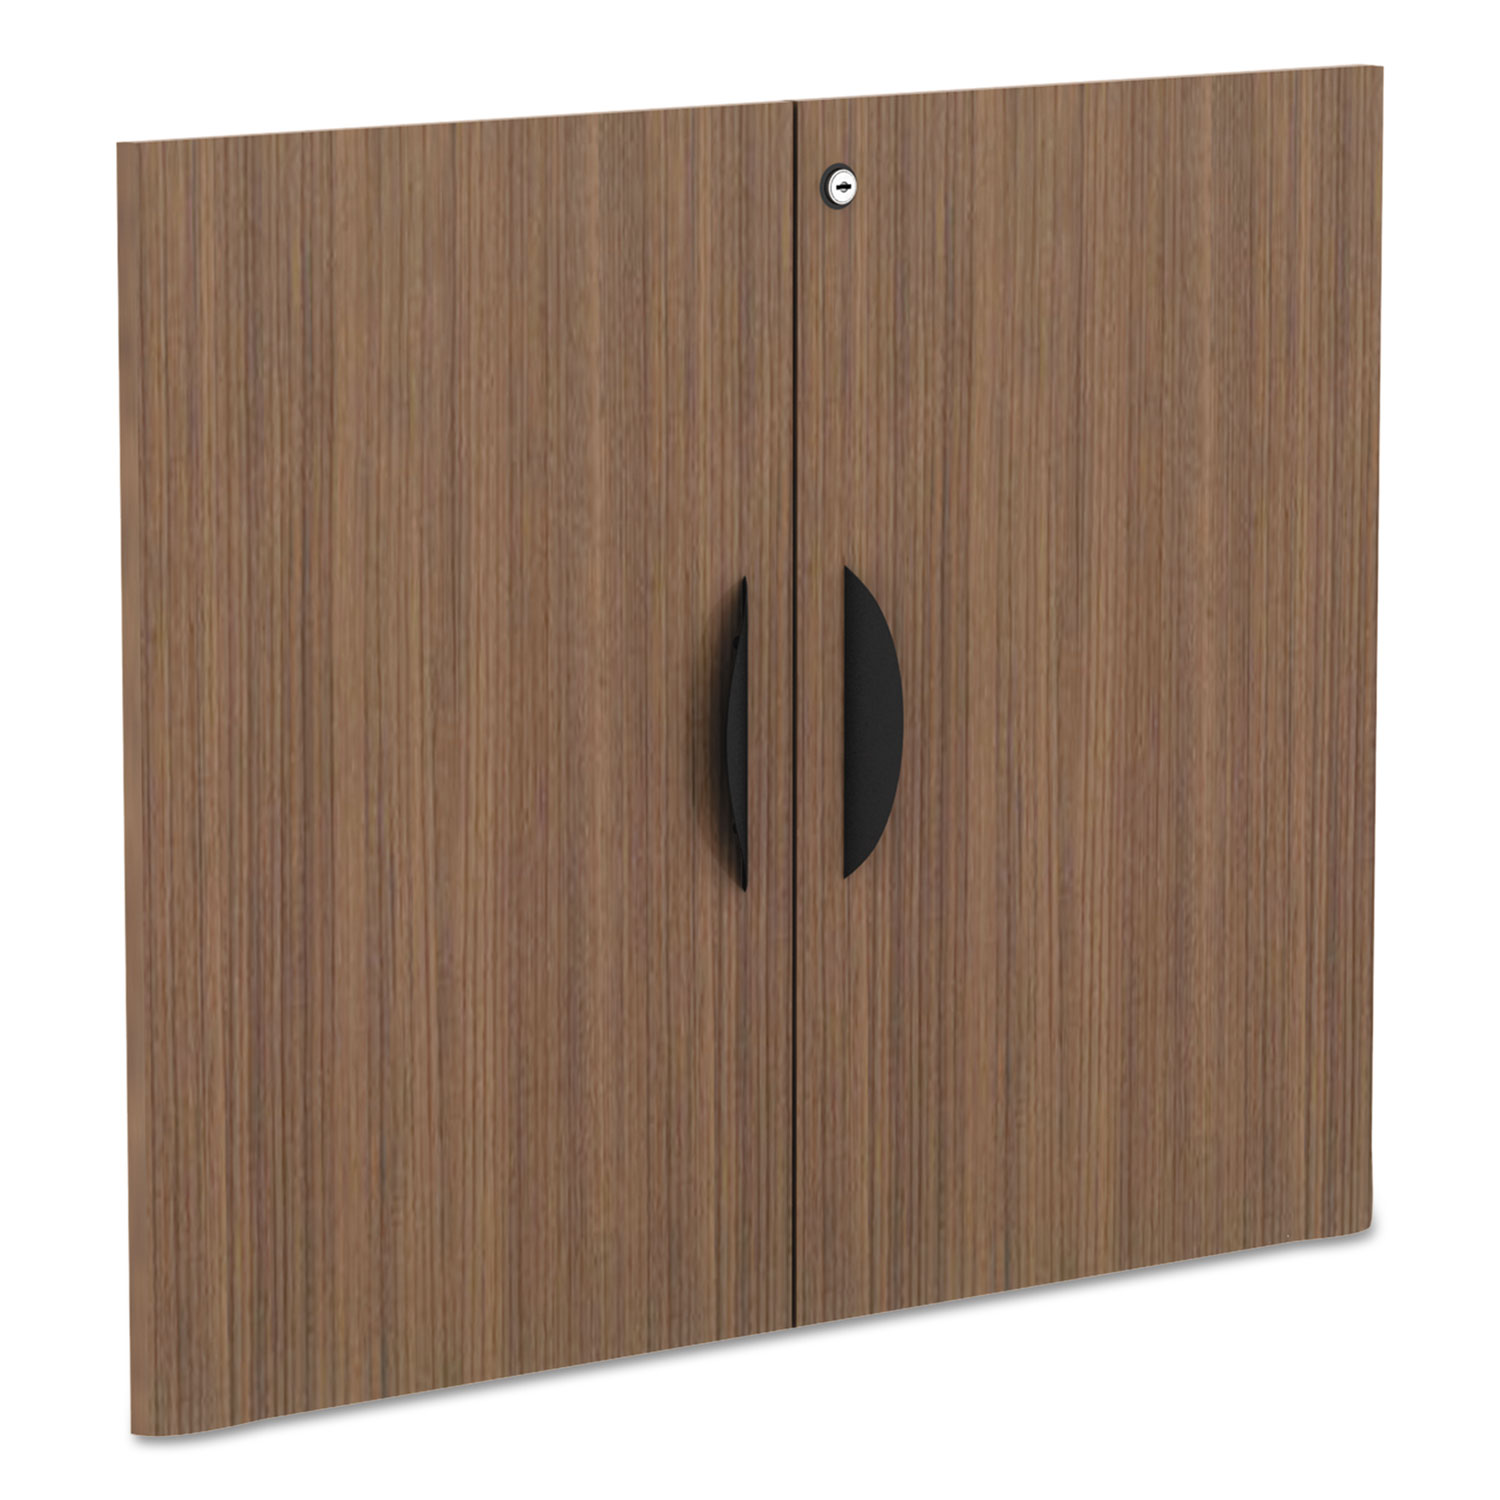 Alera Valencia Series Cabinet Door Kit For All Bookcases, 31 1/4 Wide, Walnut